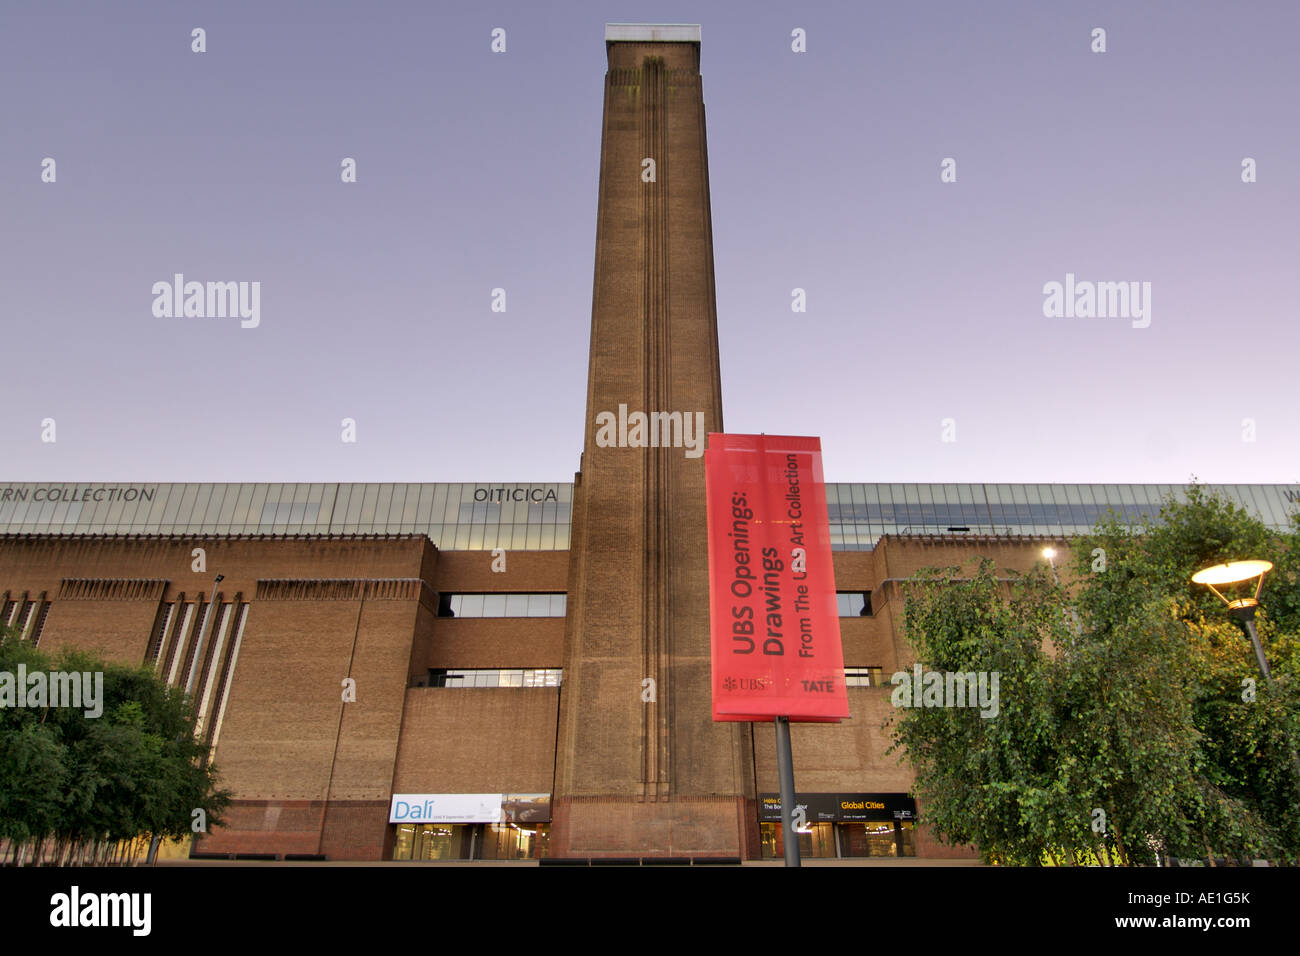 Dawn view of the Tate Modern art Gallery in London Stock Photo